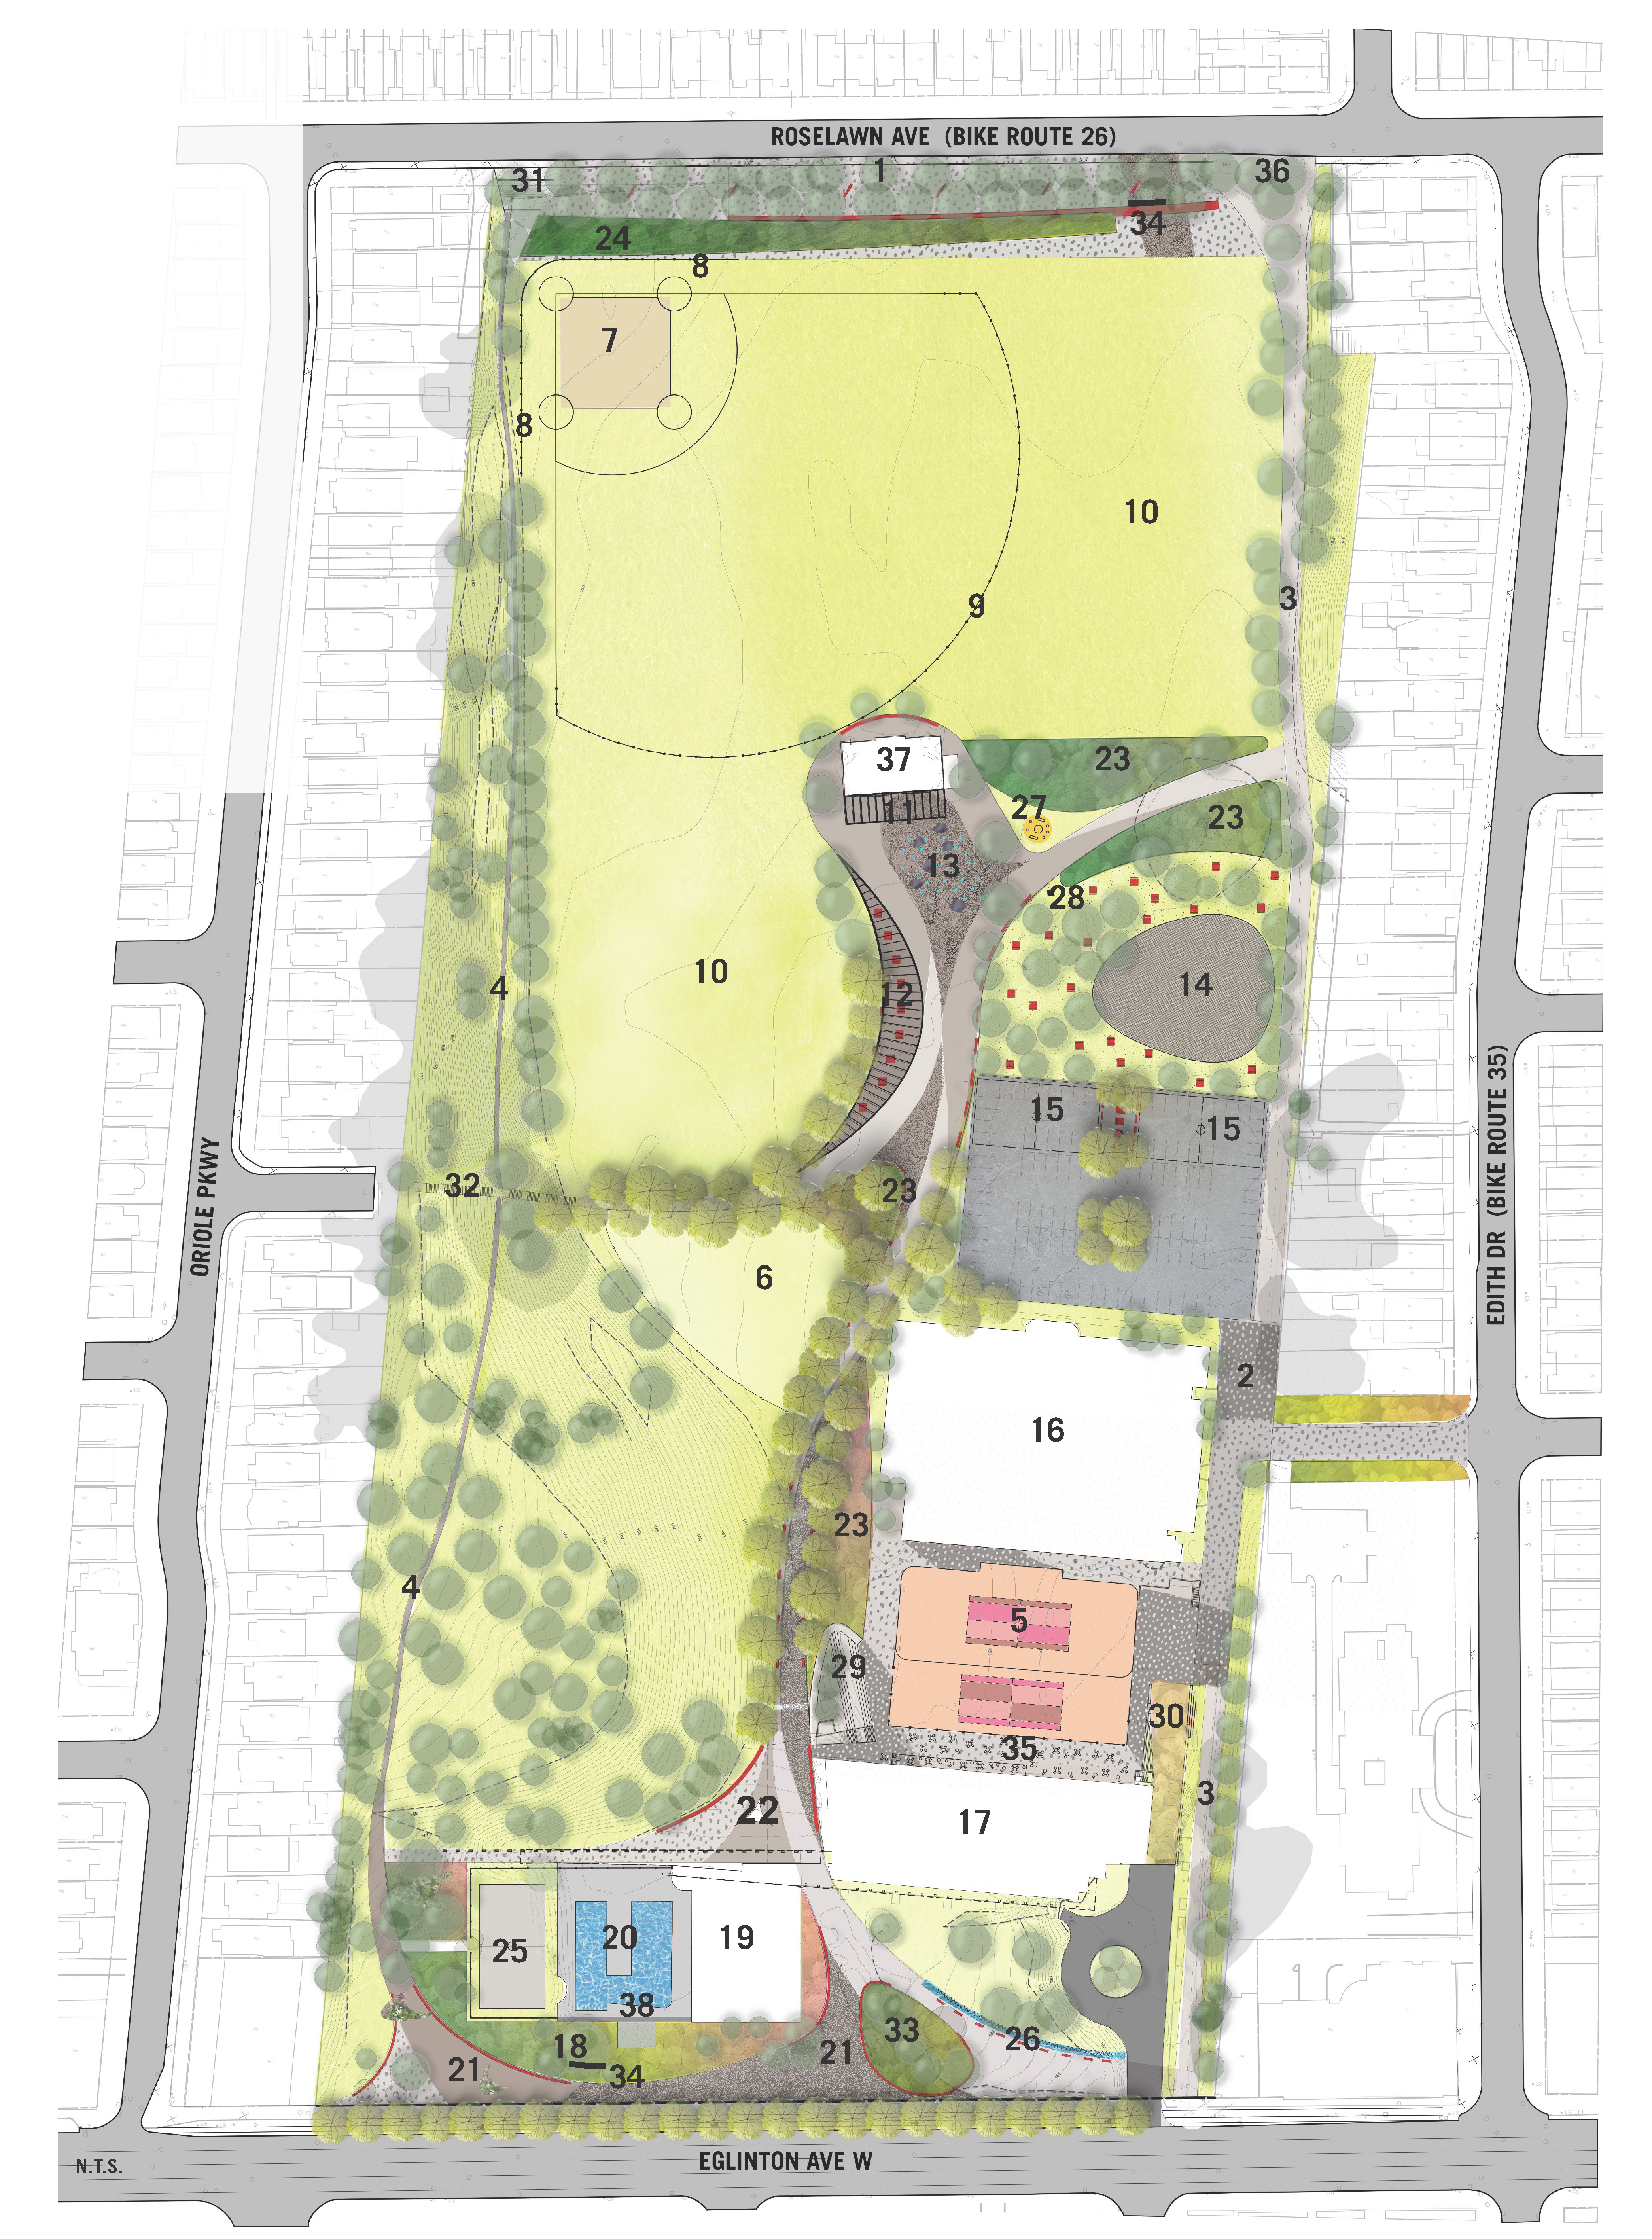 A top down graphic of Eglinton Park. While we aim to provide fully accessible content, there is no text alternative available for some of the content on this site.